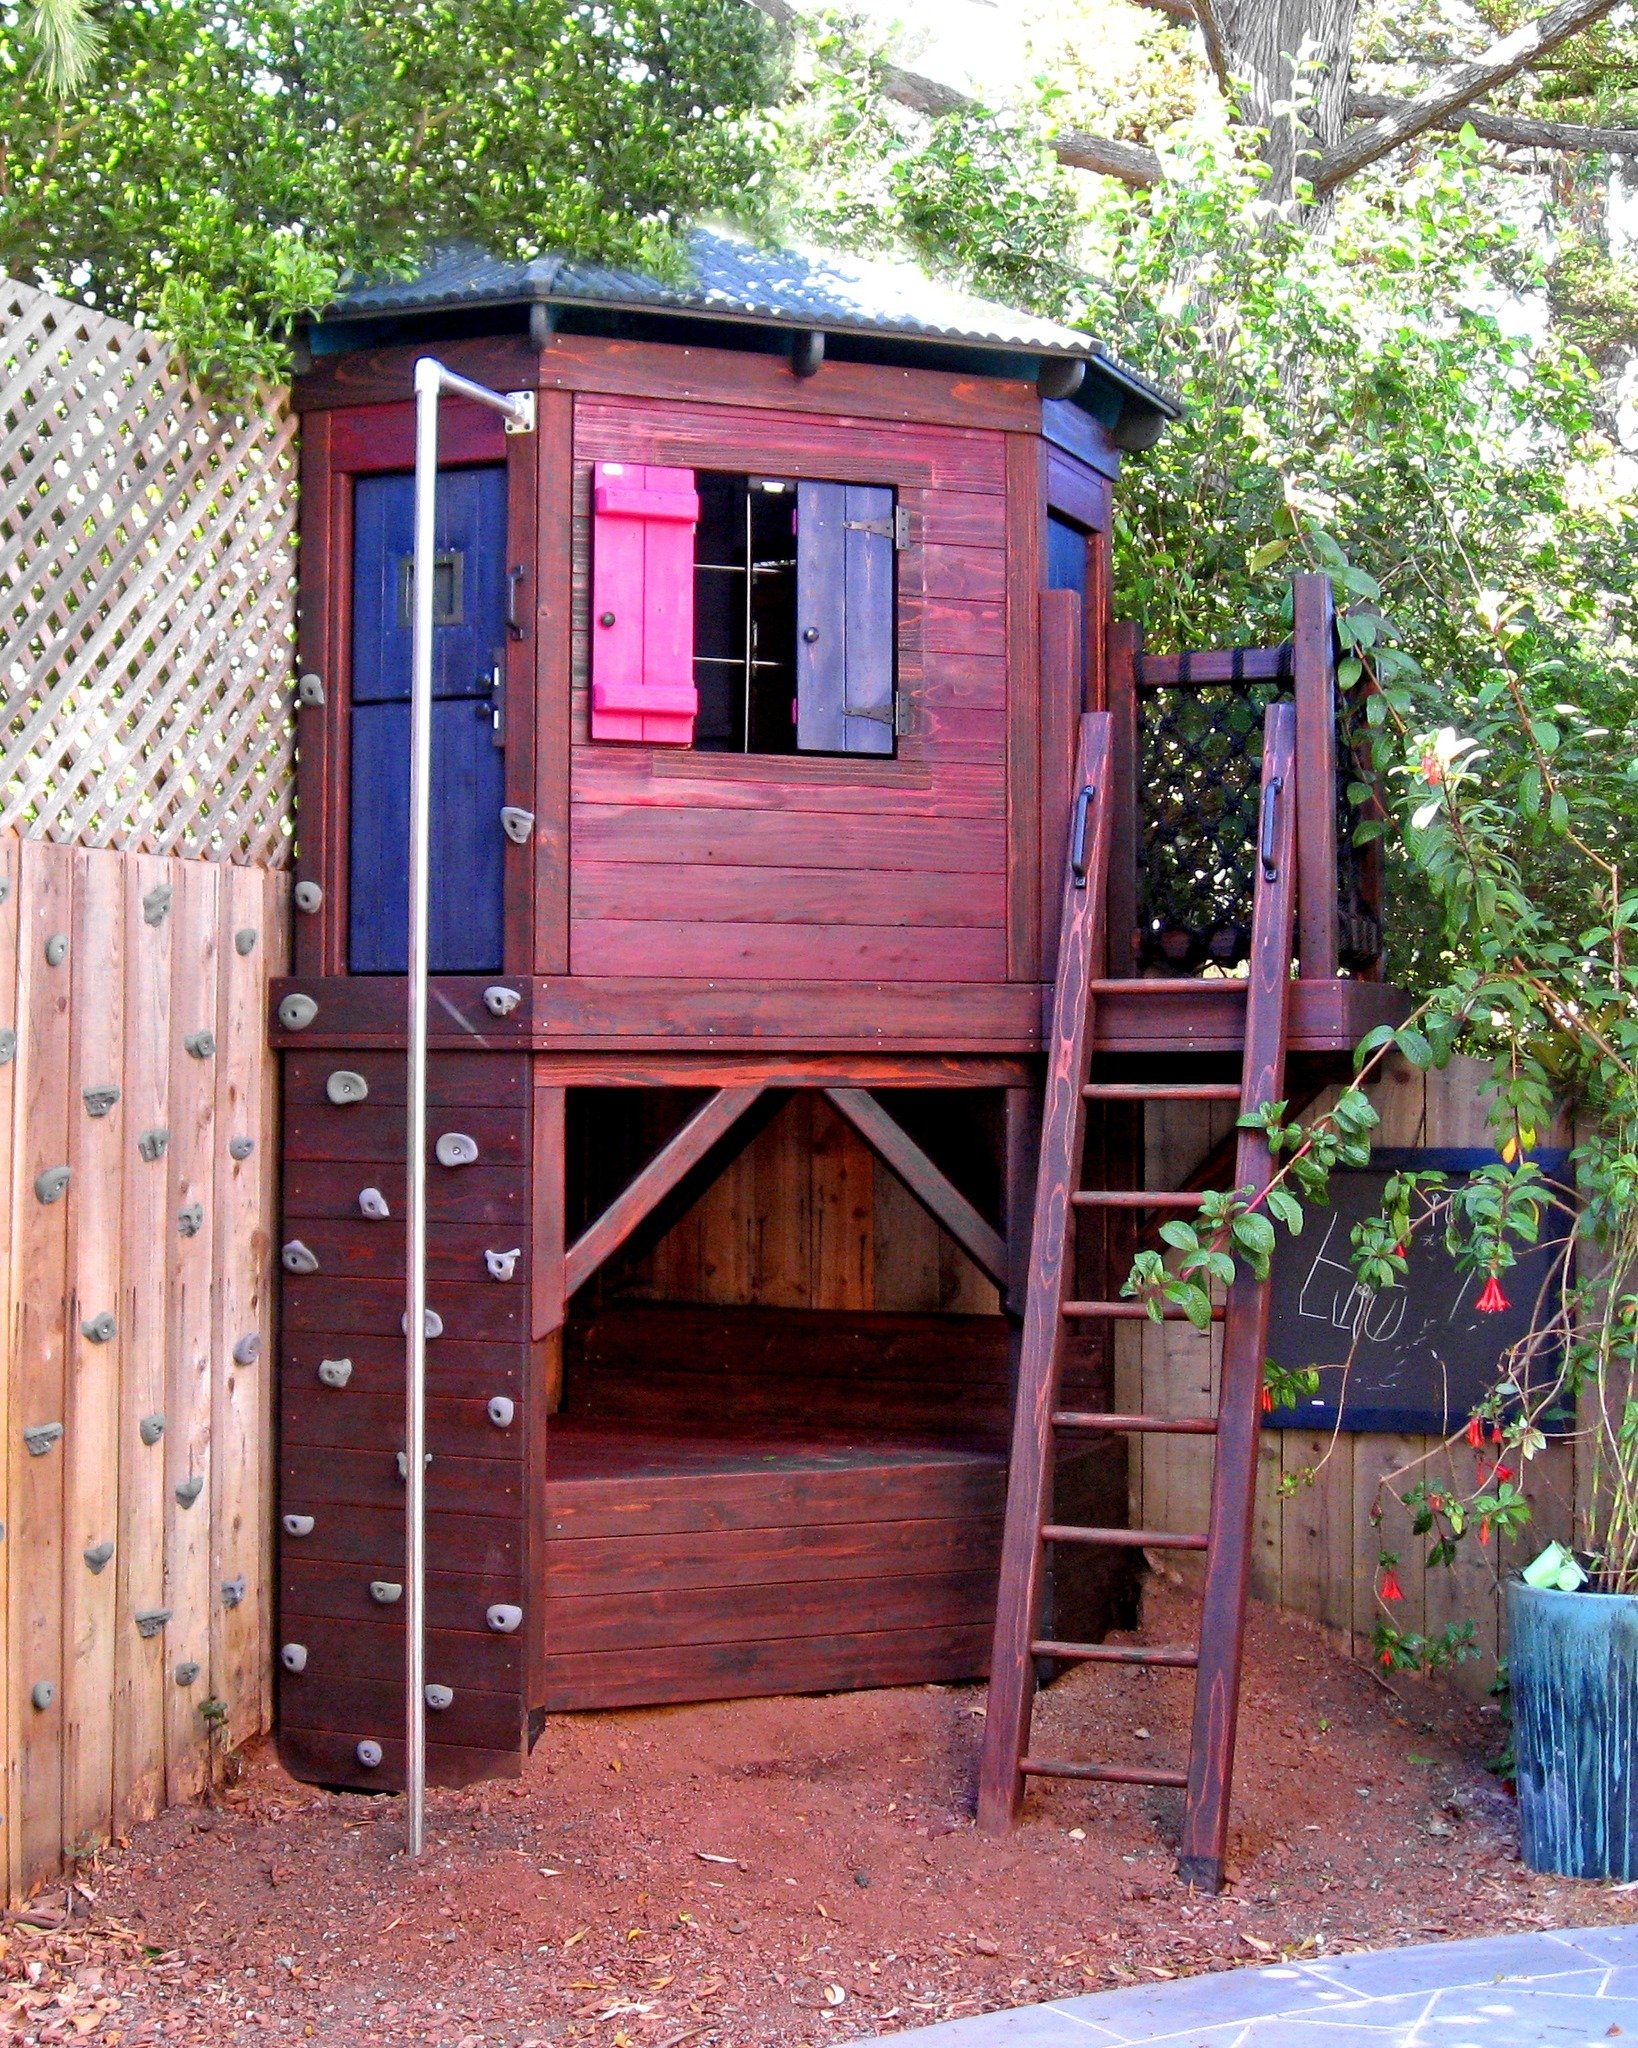 Short on space? No problem! Tuck this little play structure into any corner of your yard for endless play.

Even this small play structure features Barbara&rsquo;s loops of play design. Up the ladder, into the playhouse and down the firepole. Or do i